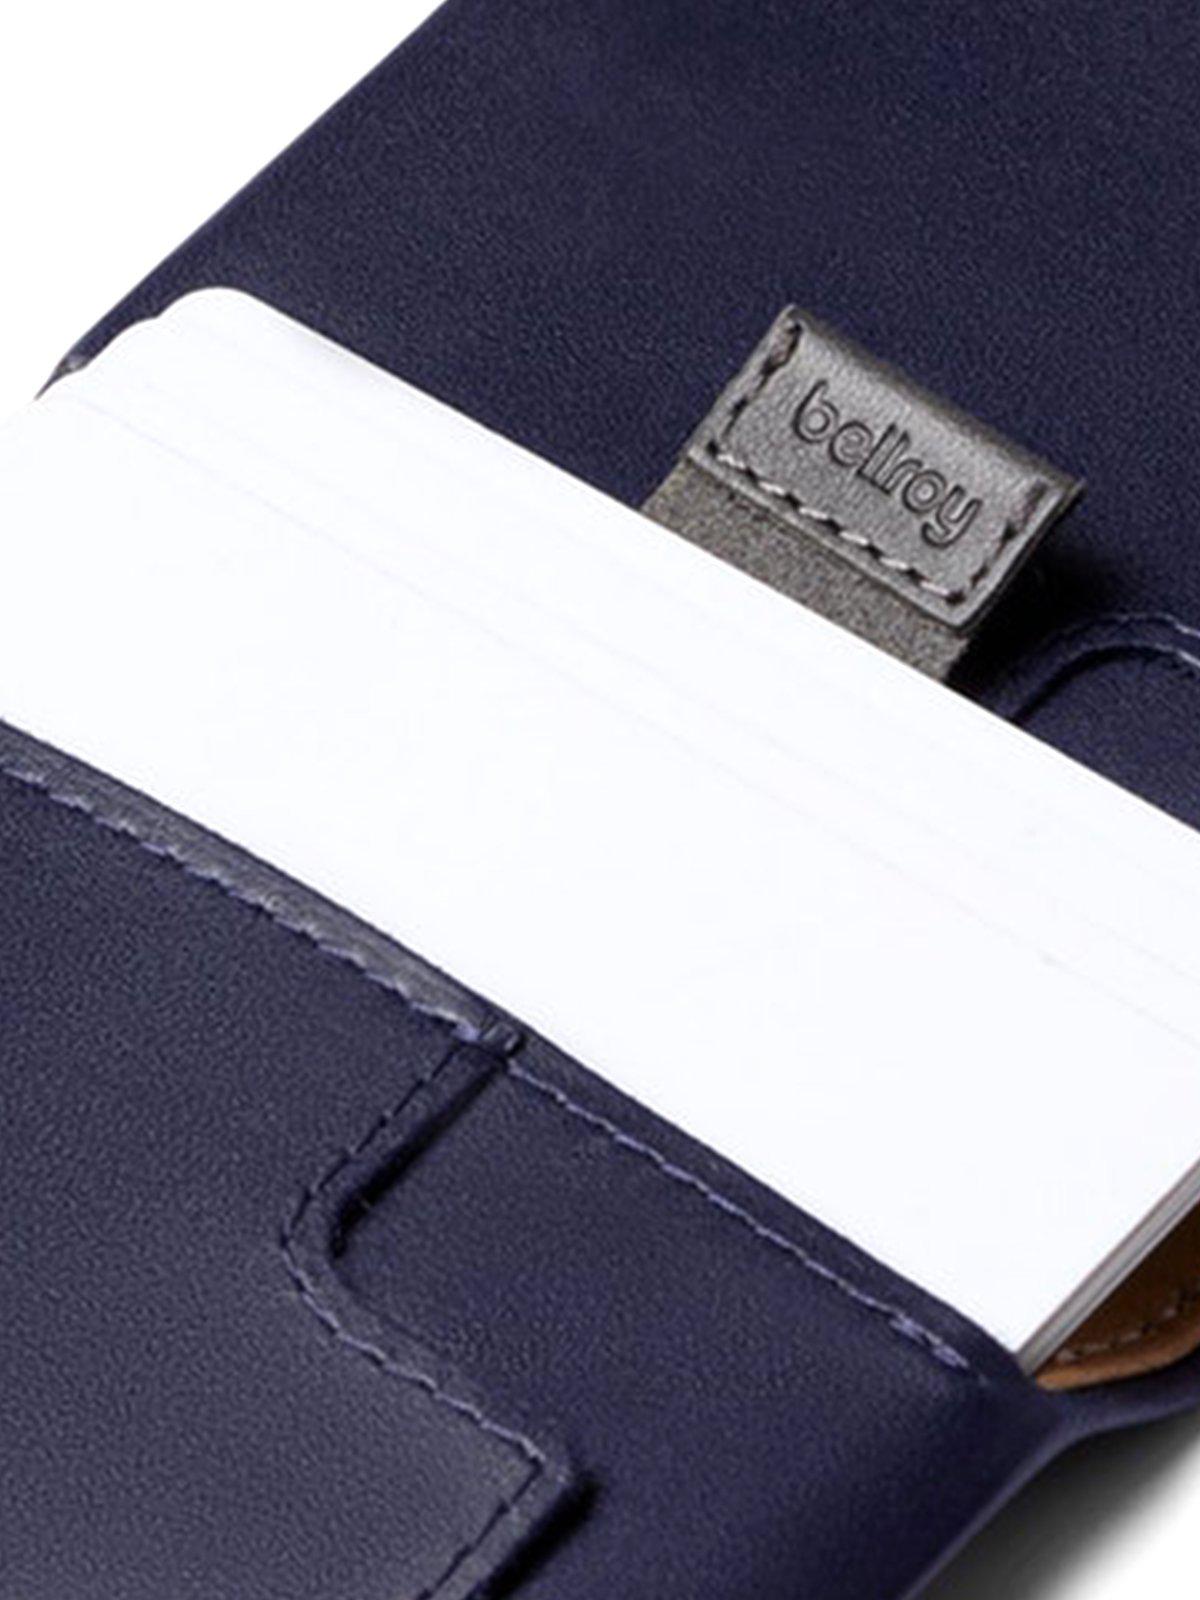 Bellroy Slim Sleeve Wallet Navy - MORE by Morello Indonesia